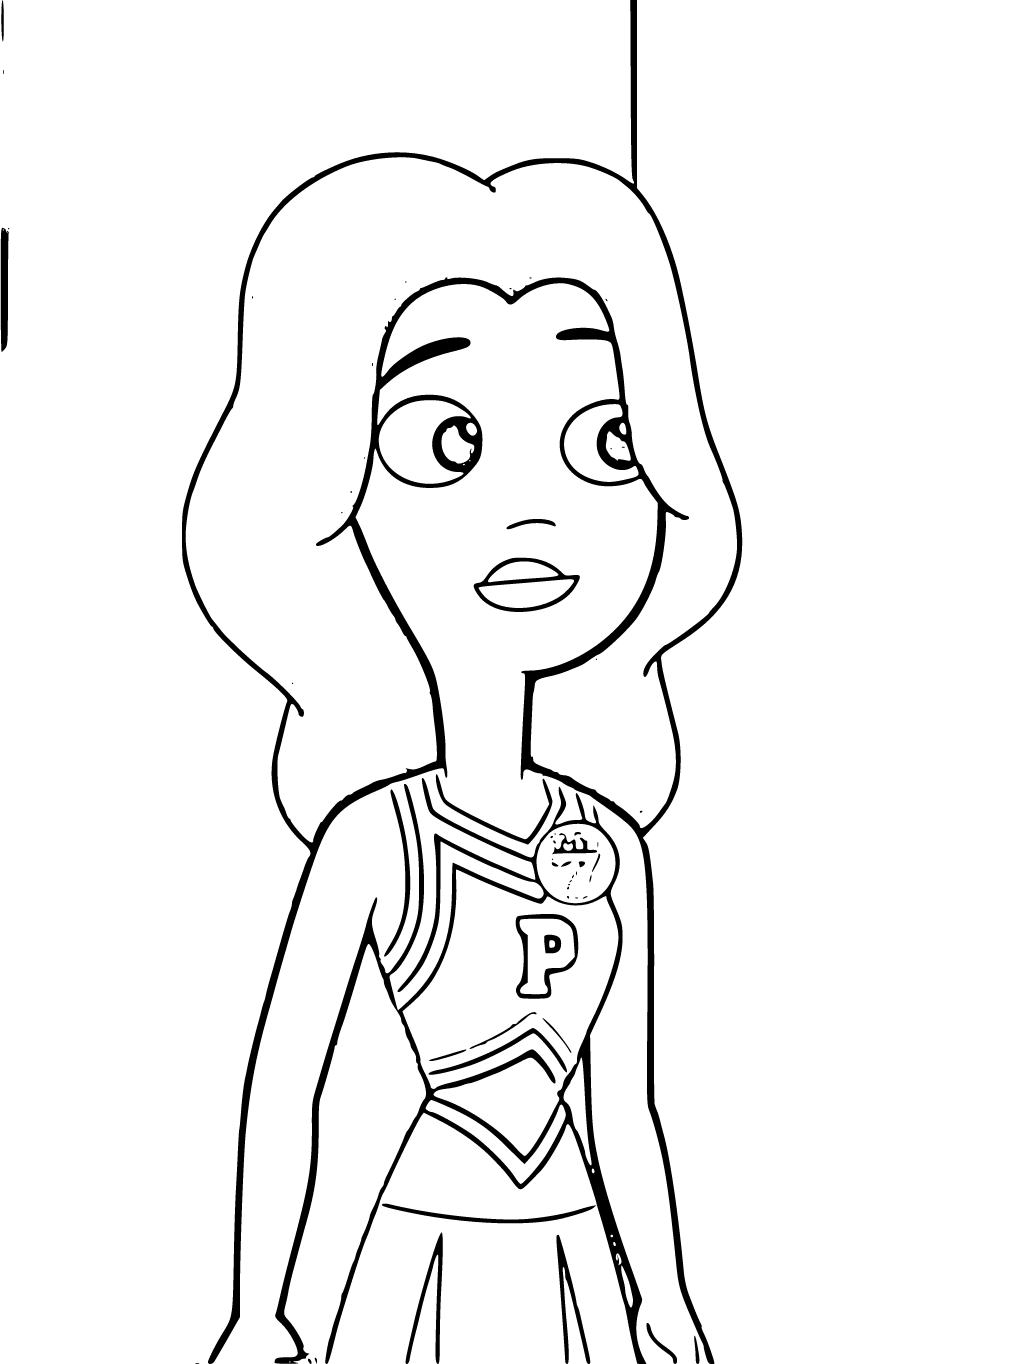 Printable fred as cheerleader Coloring Page for kids.